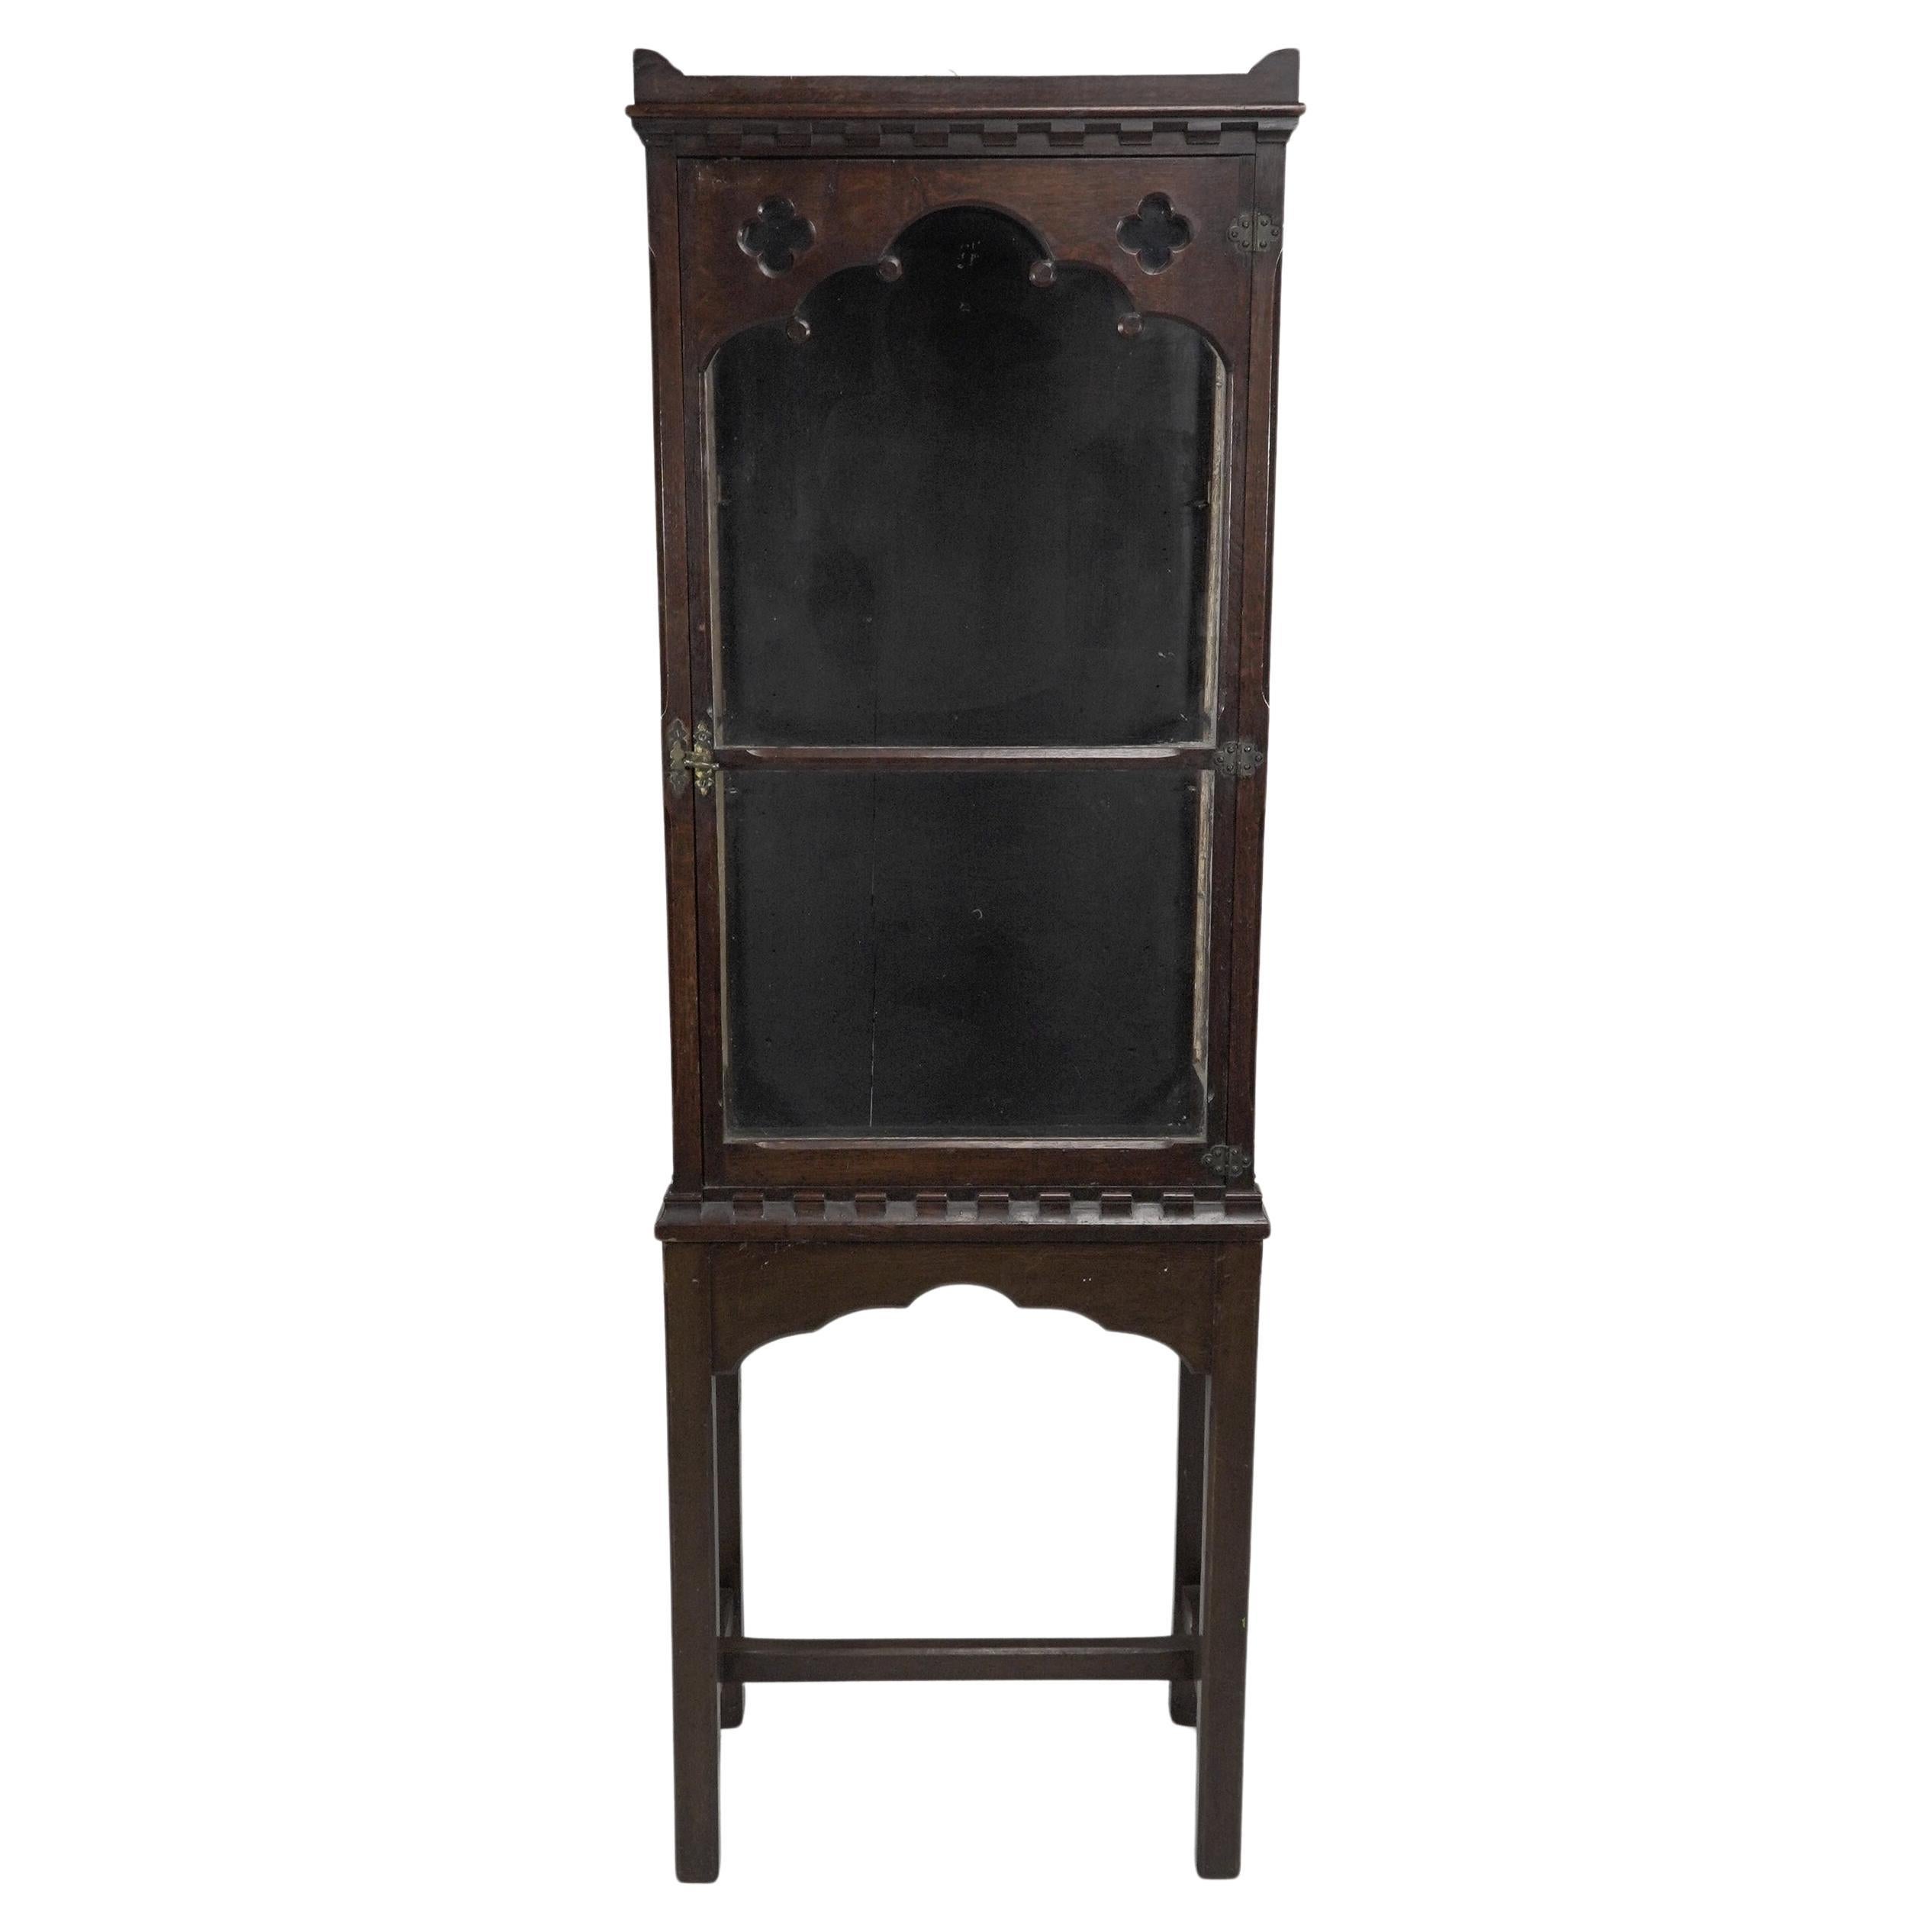 Gothic Revival oak display cabinet with arch & quatrefoil decoration on a stand. For Sale